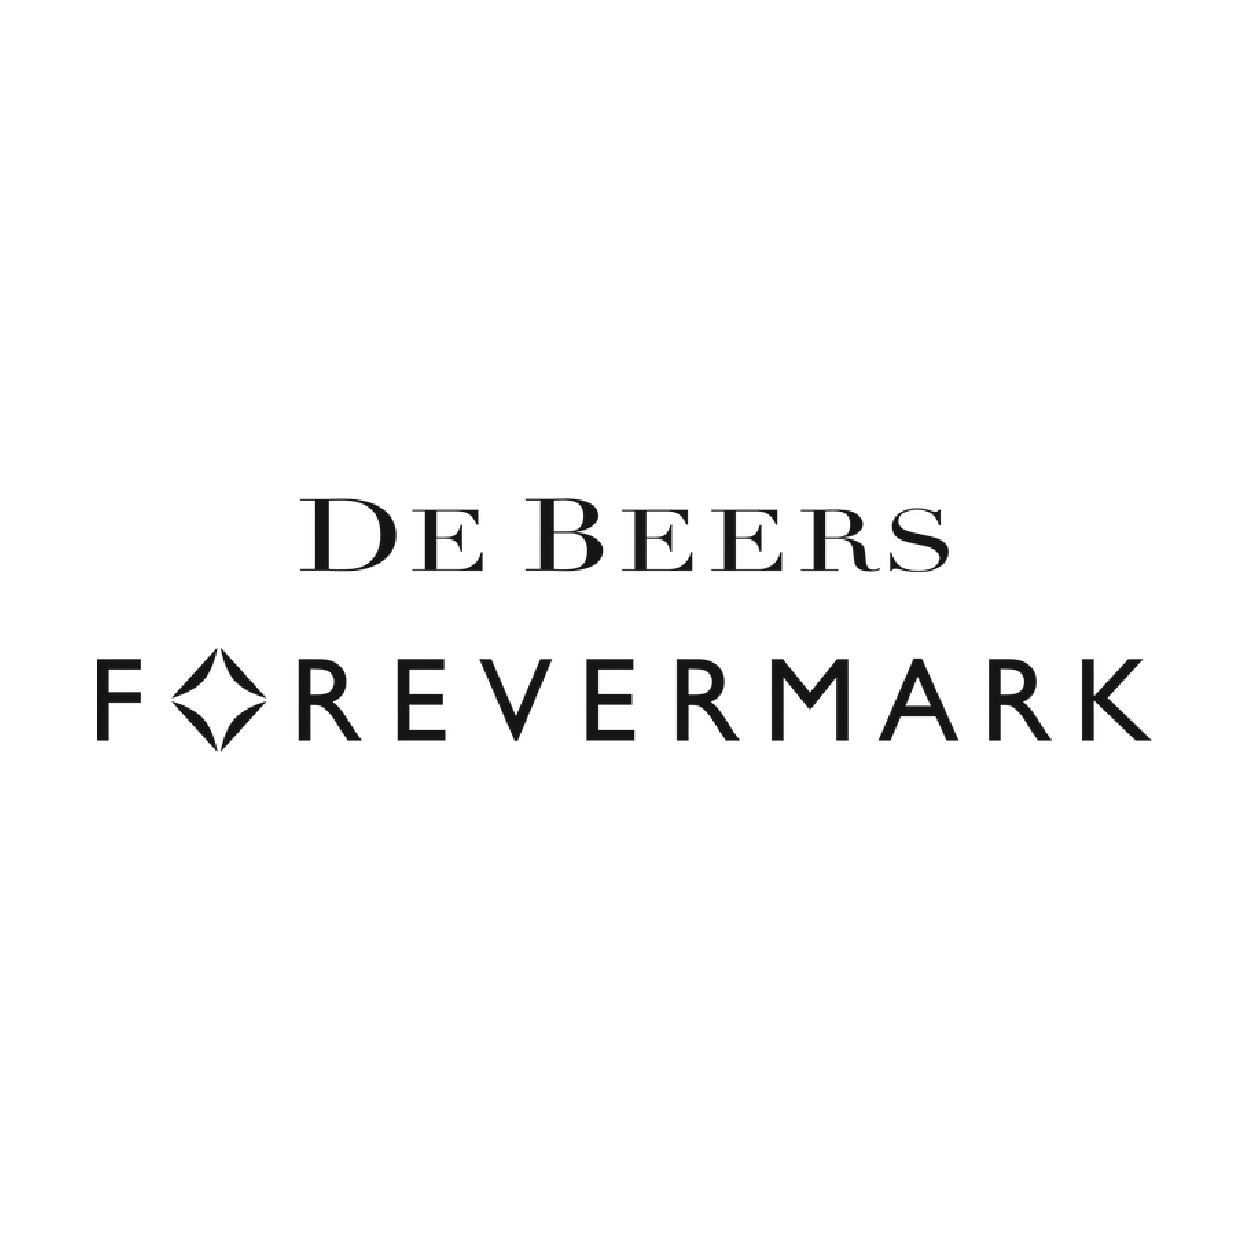 Shop De Beers Forevermark at La Mine d'Or Jewellers, Moncton, NB and Halifax, NS